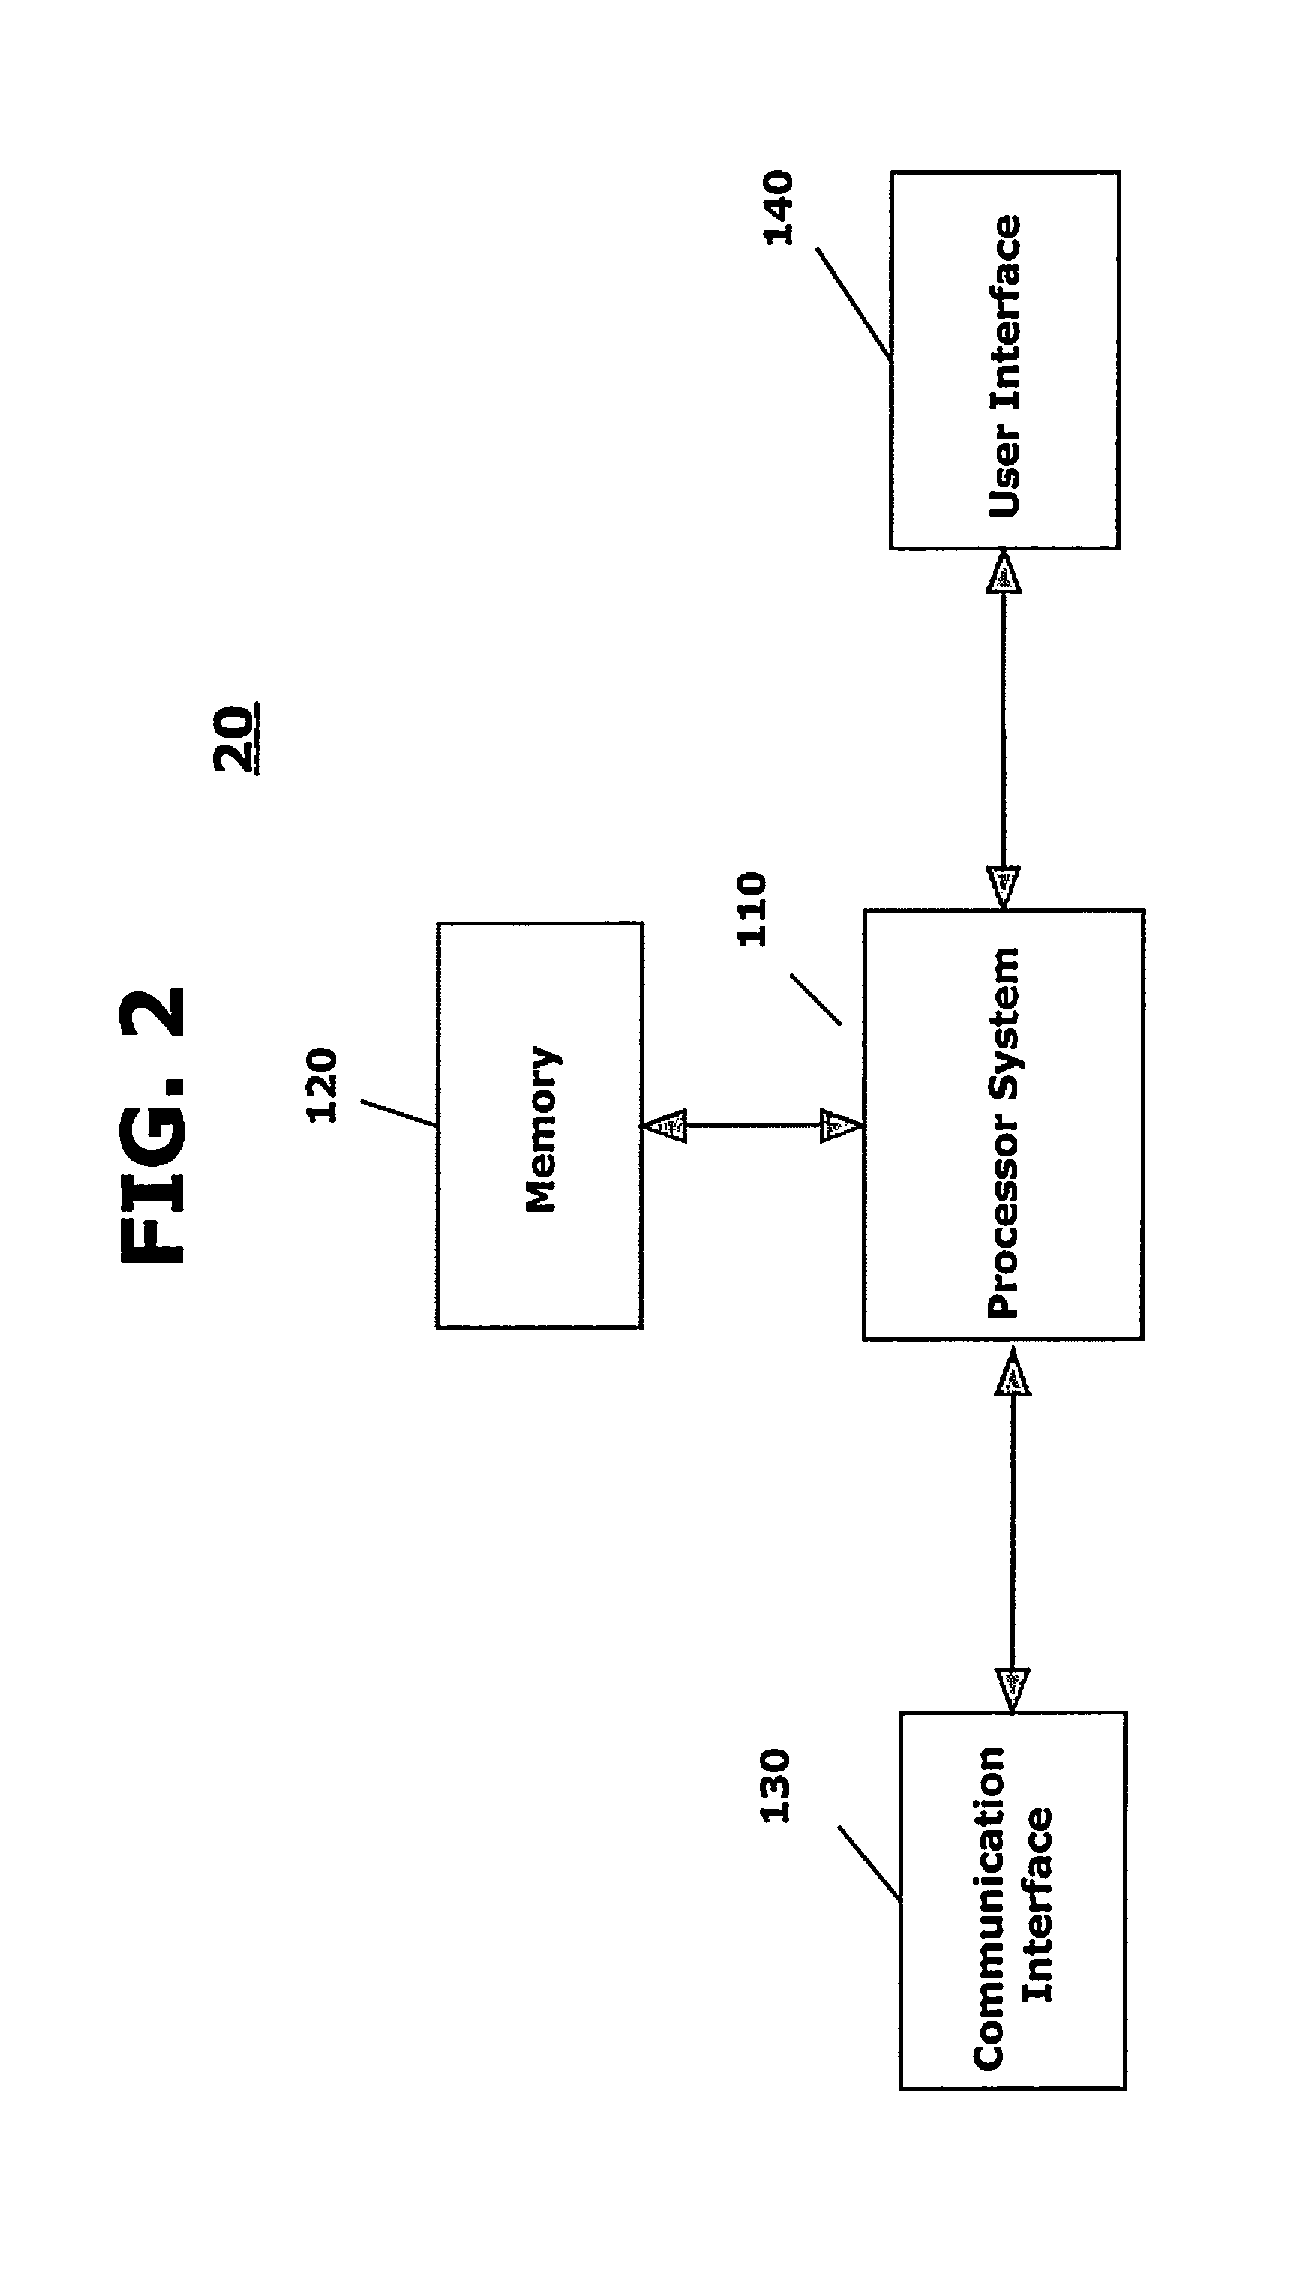 System and method for social invitations to facilitate playing and sharing of mobile application or mobile game on mobile device